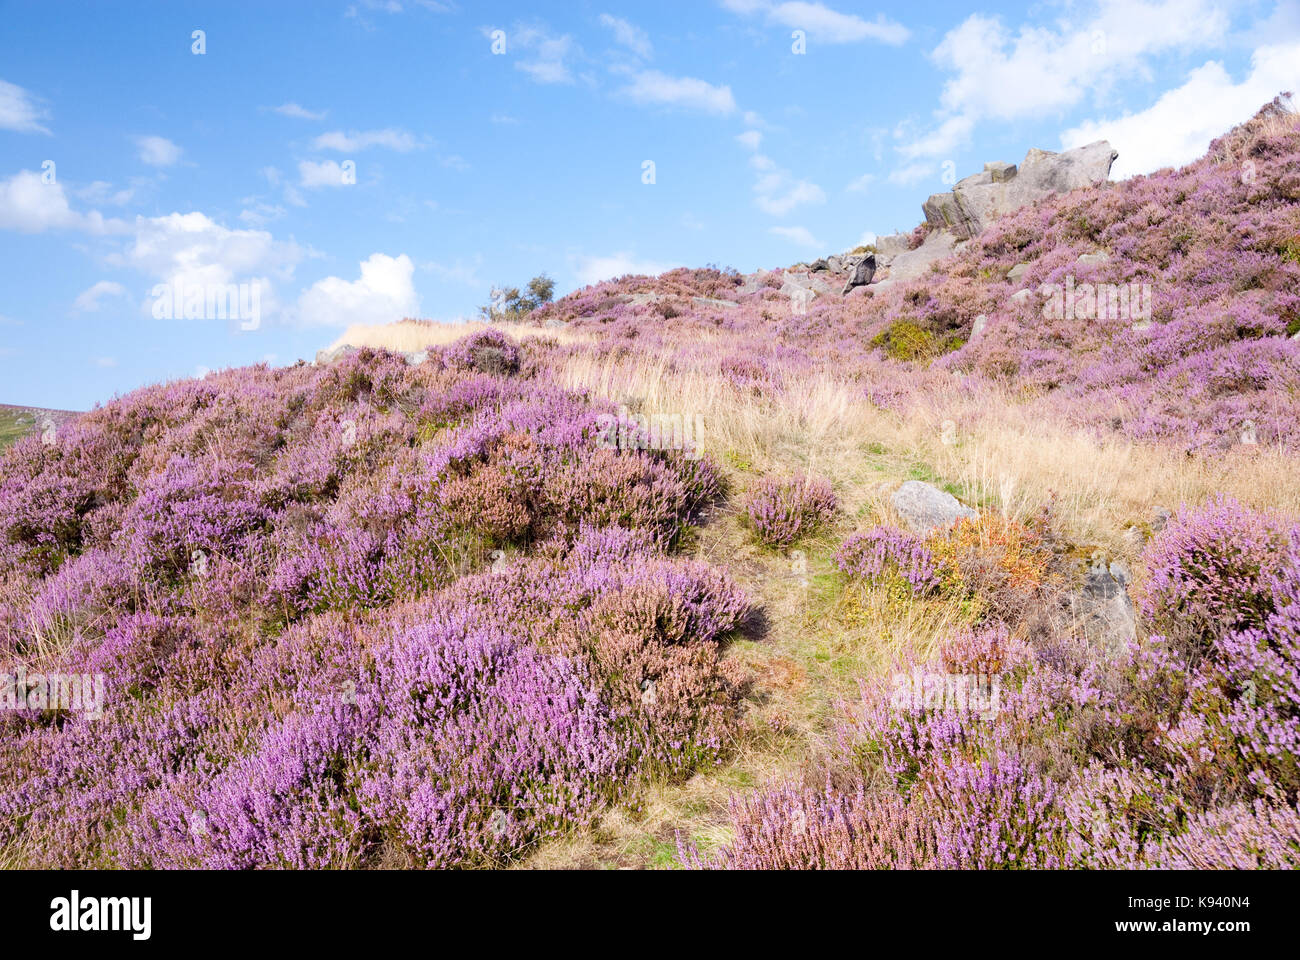 Derbyshire, UK - Aug 2015: Pathway through pink flowering heather up a steep hillside on 28 Aug at Burbage South Edge, Peak District Stock Photo